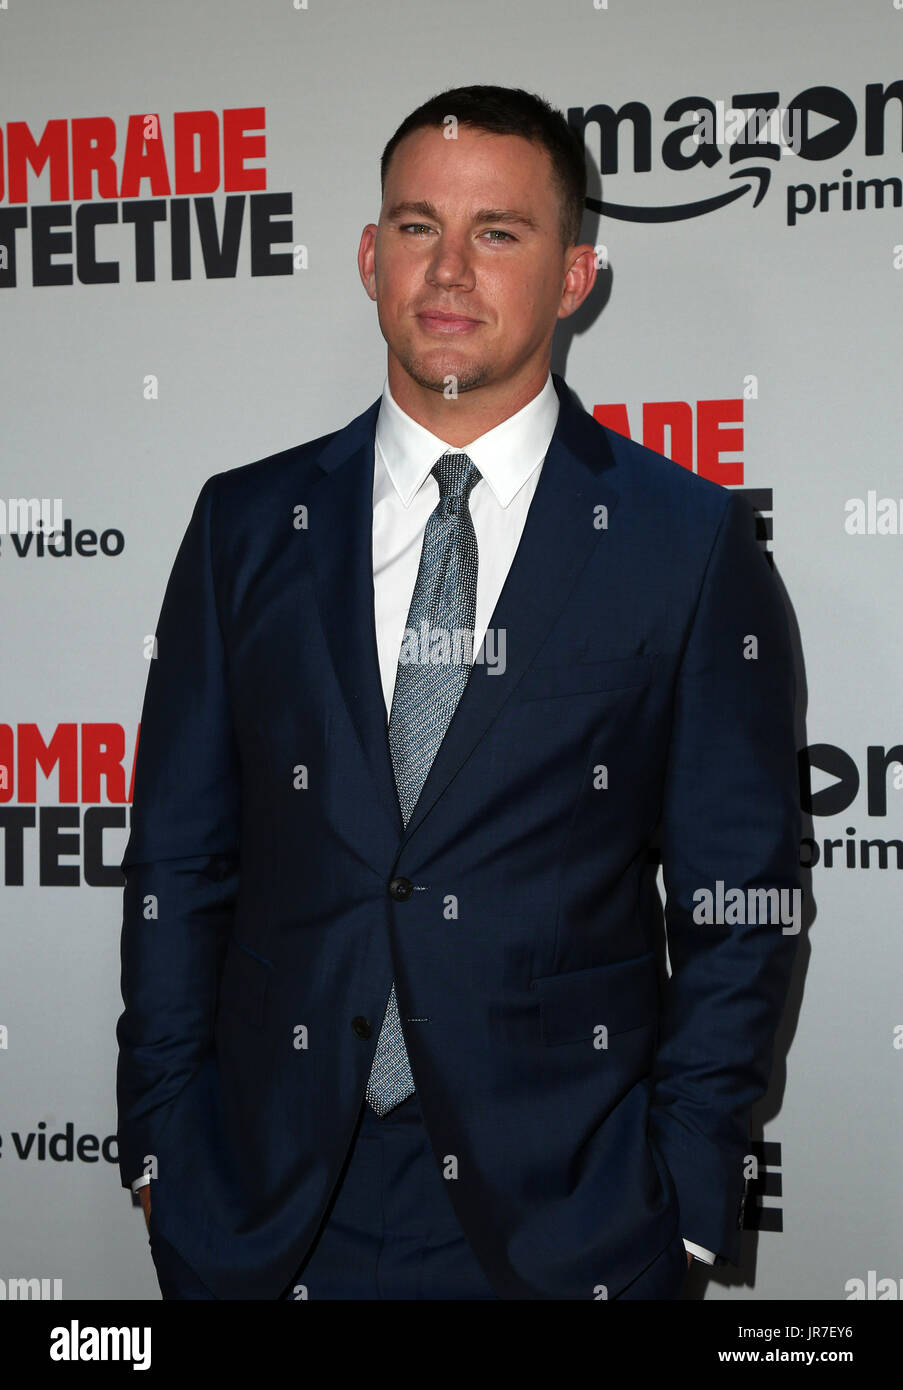 Hollywood, Ca. 03rd Aug, 2017. Channing Tatum, At Premiere Of Amazon's 'Comrade Detective' At The ArcLight Hollywood In California on August 03, 2017. Credit: Fs/Media Punch/Alamy Live News Stock Photo